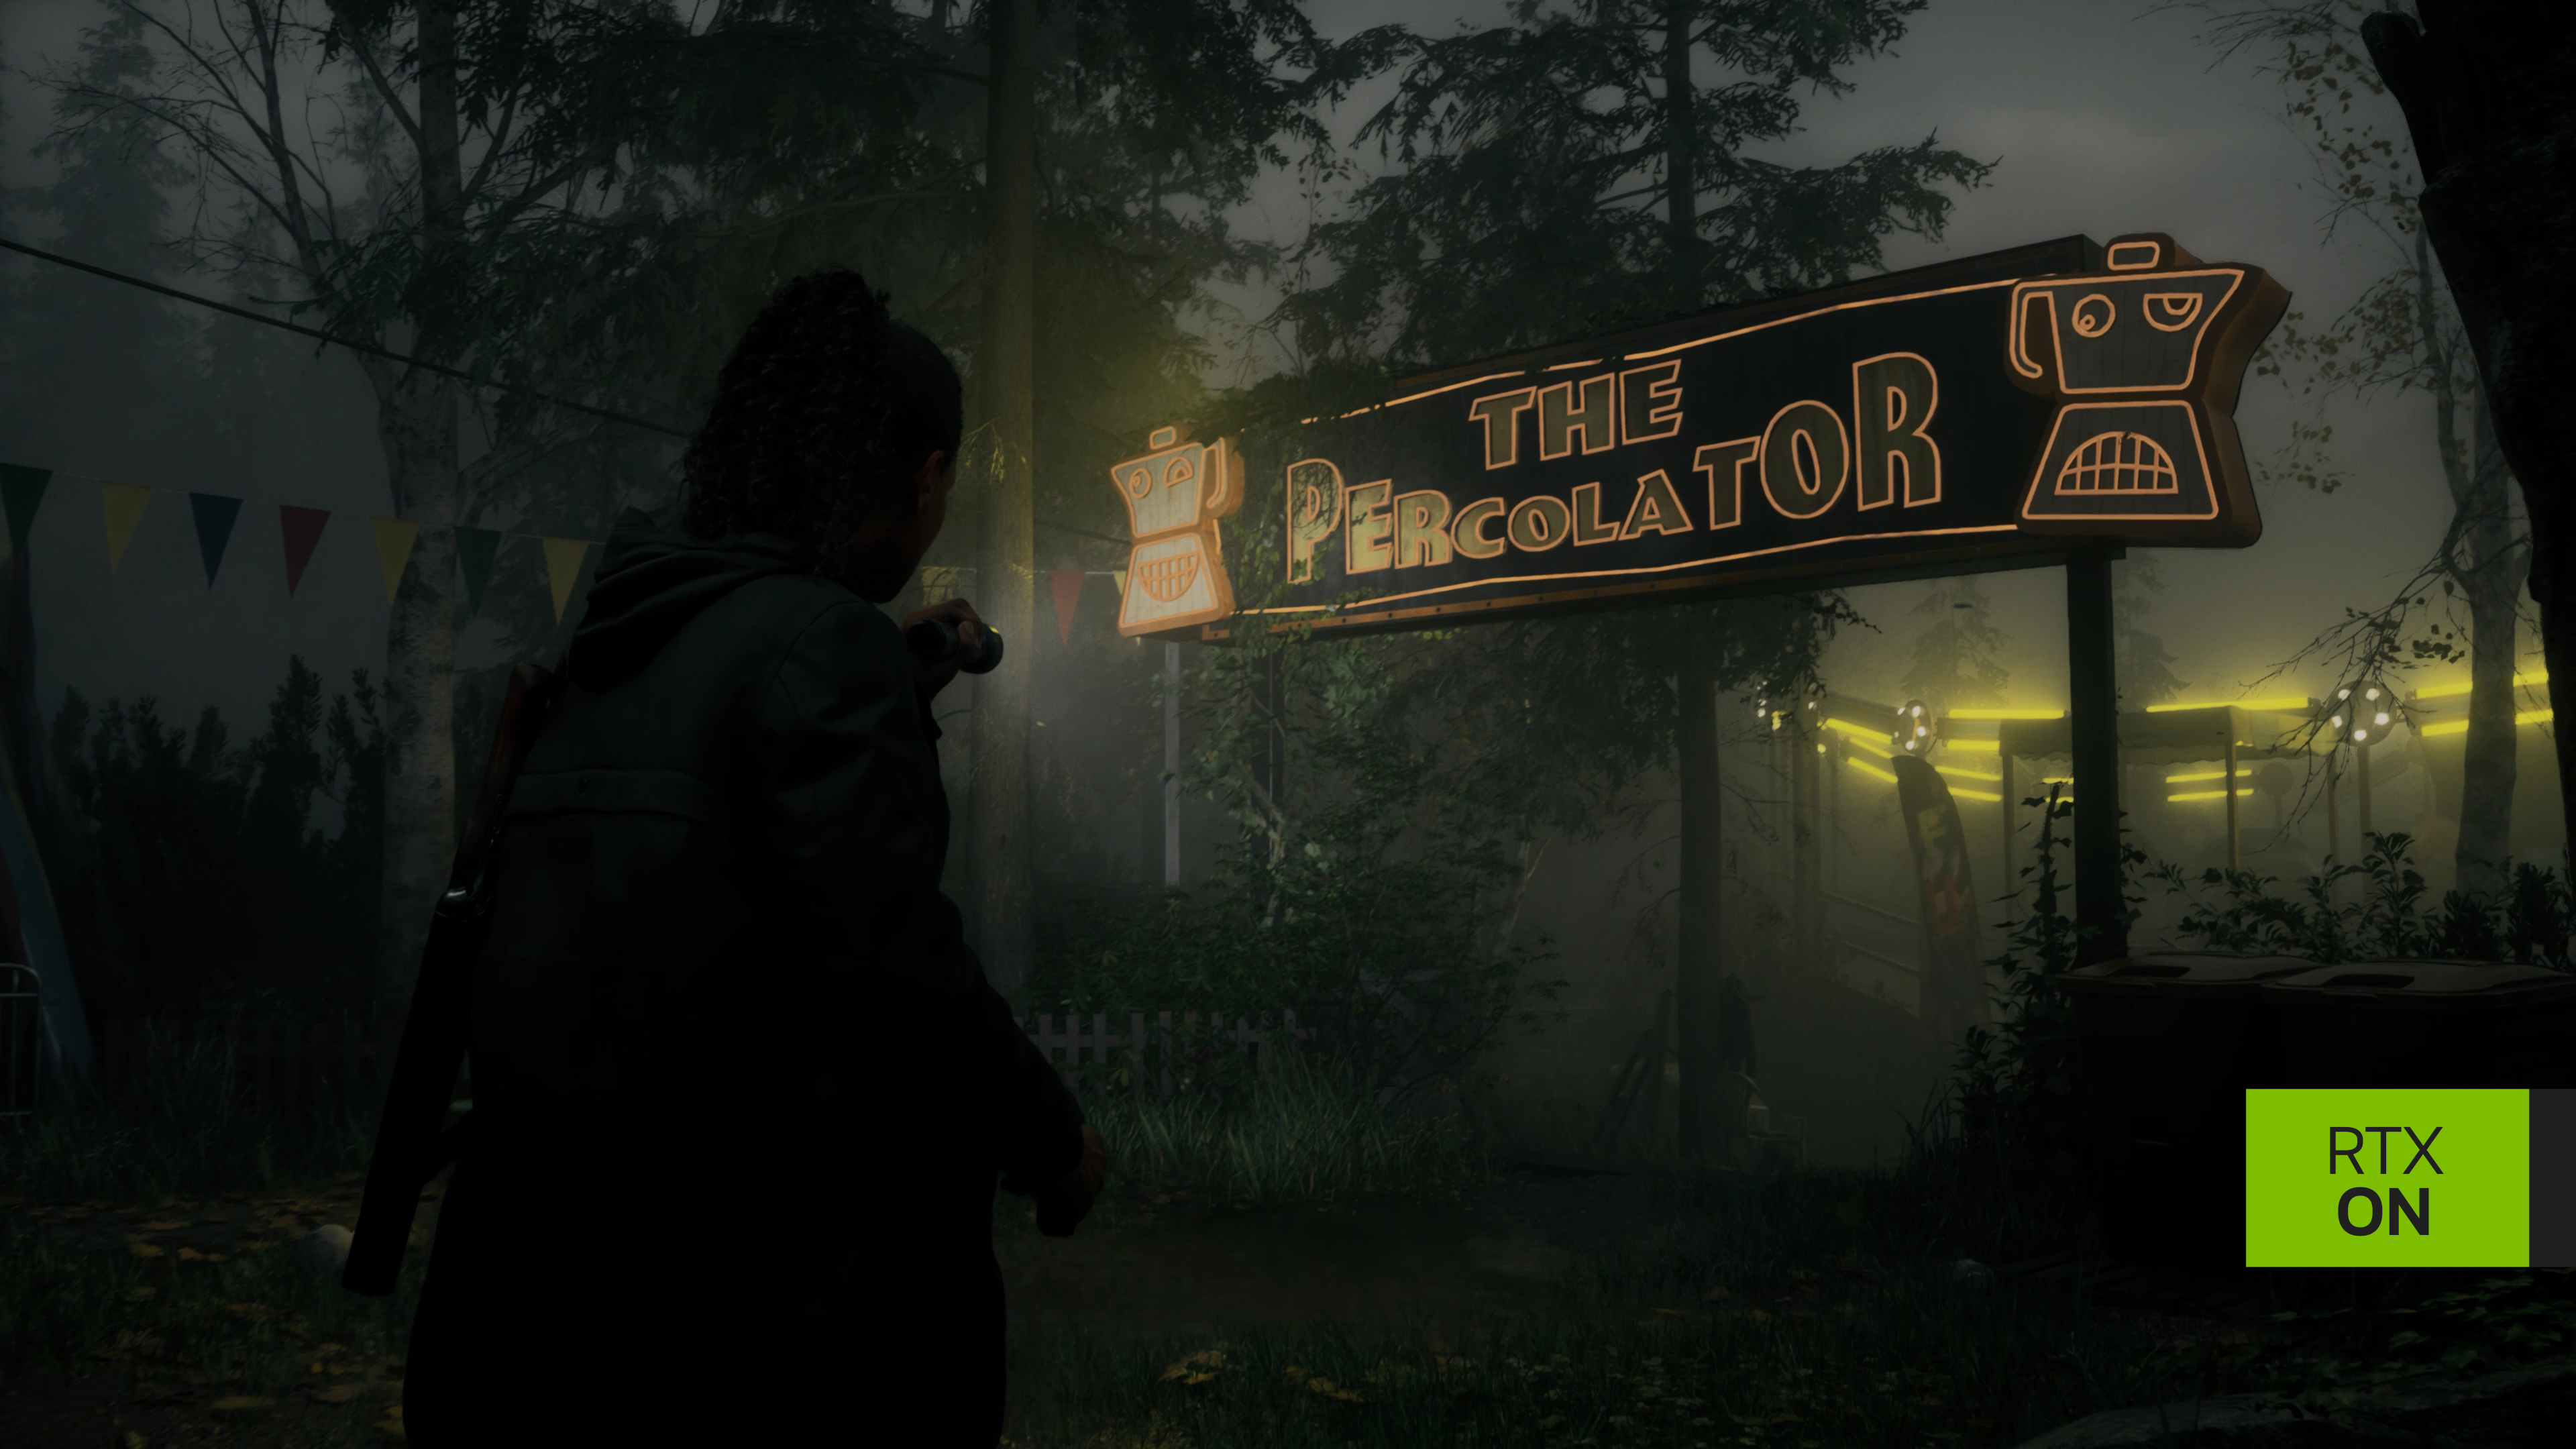 Alan Wake 2 Out Now With Full Ray Tracing & DLSS 3.5: Get The Ultimate  Experience On GeForce RTX 40 Series GPUs, GeForce News